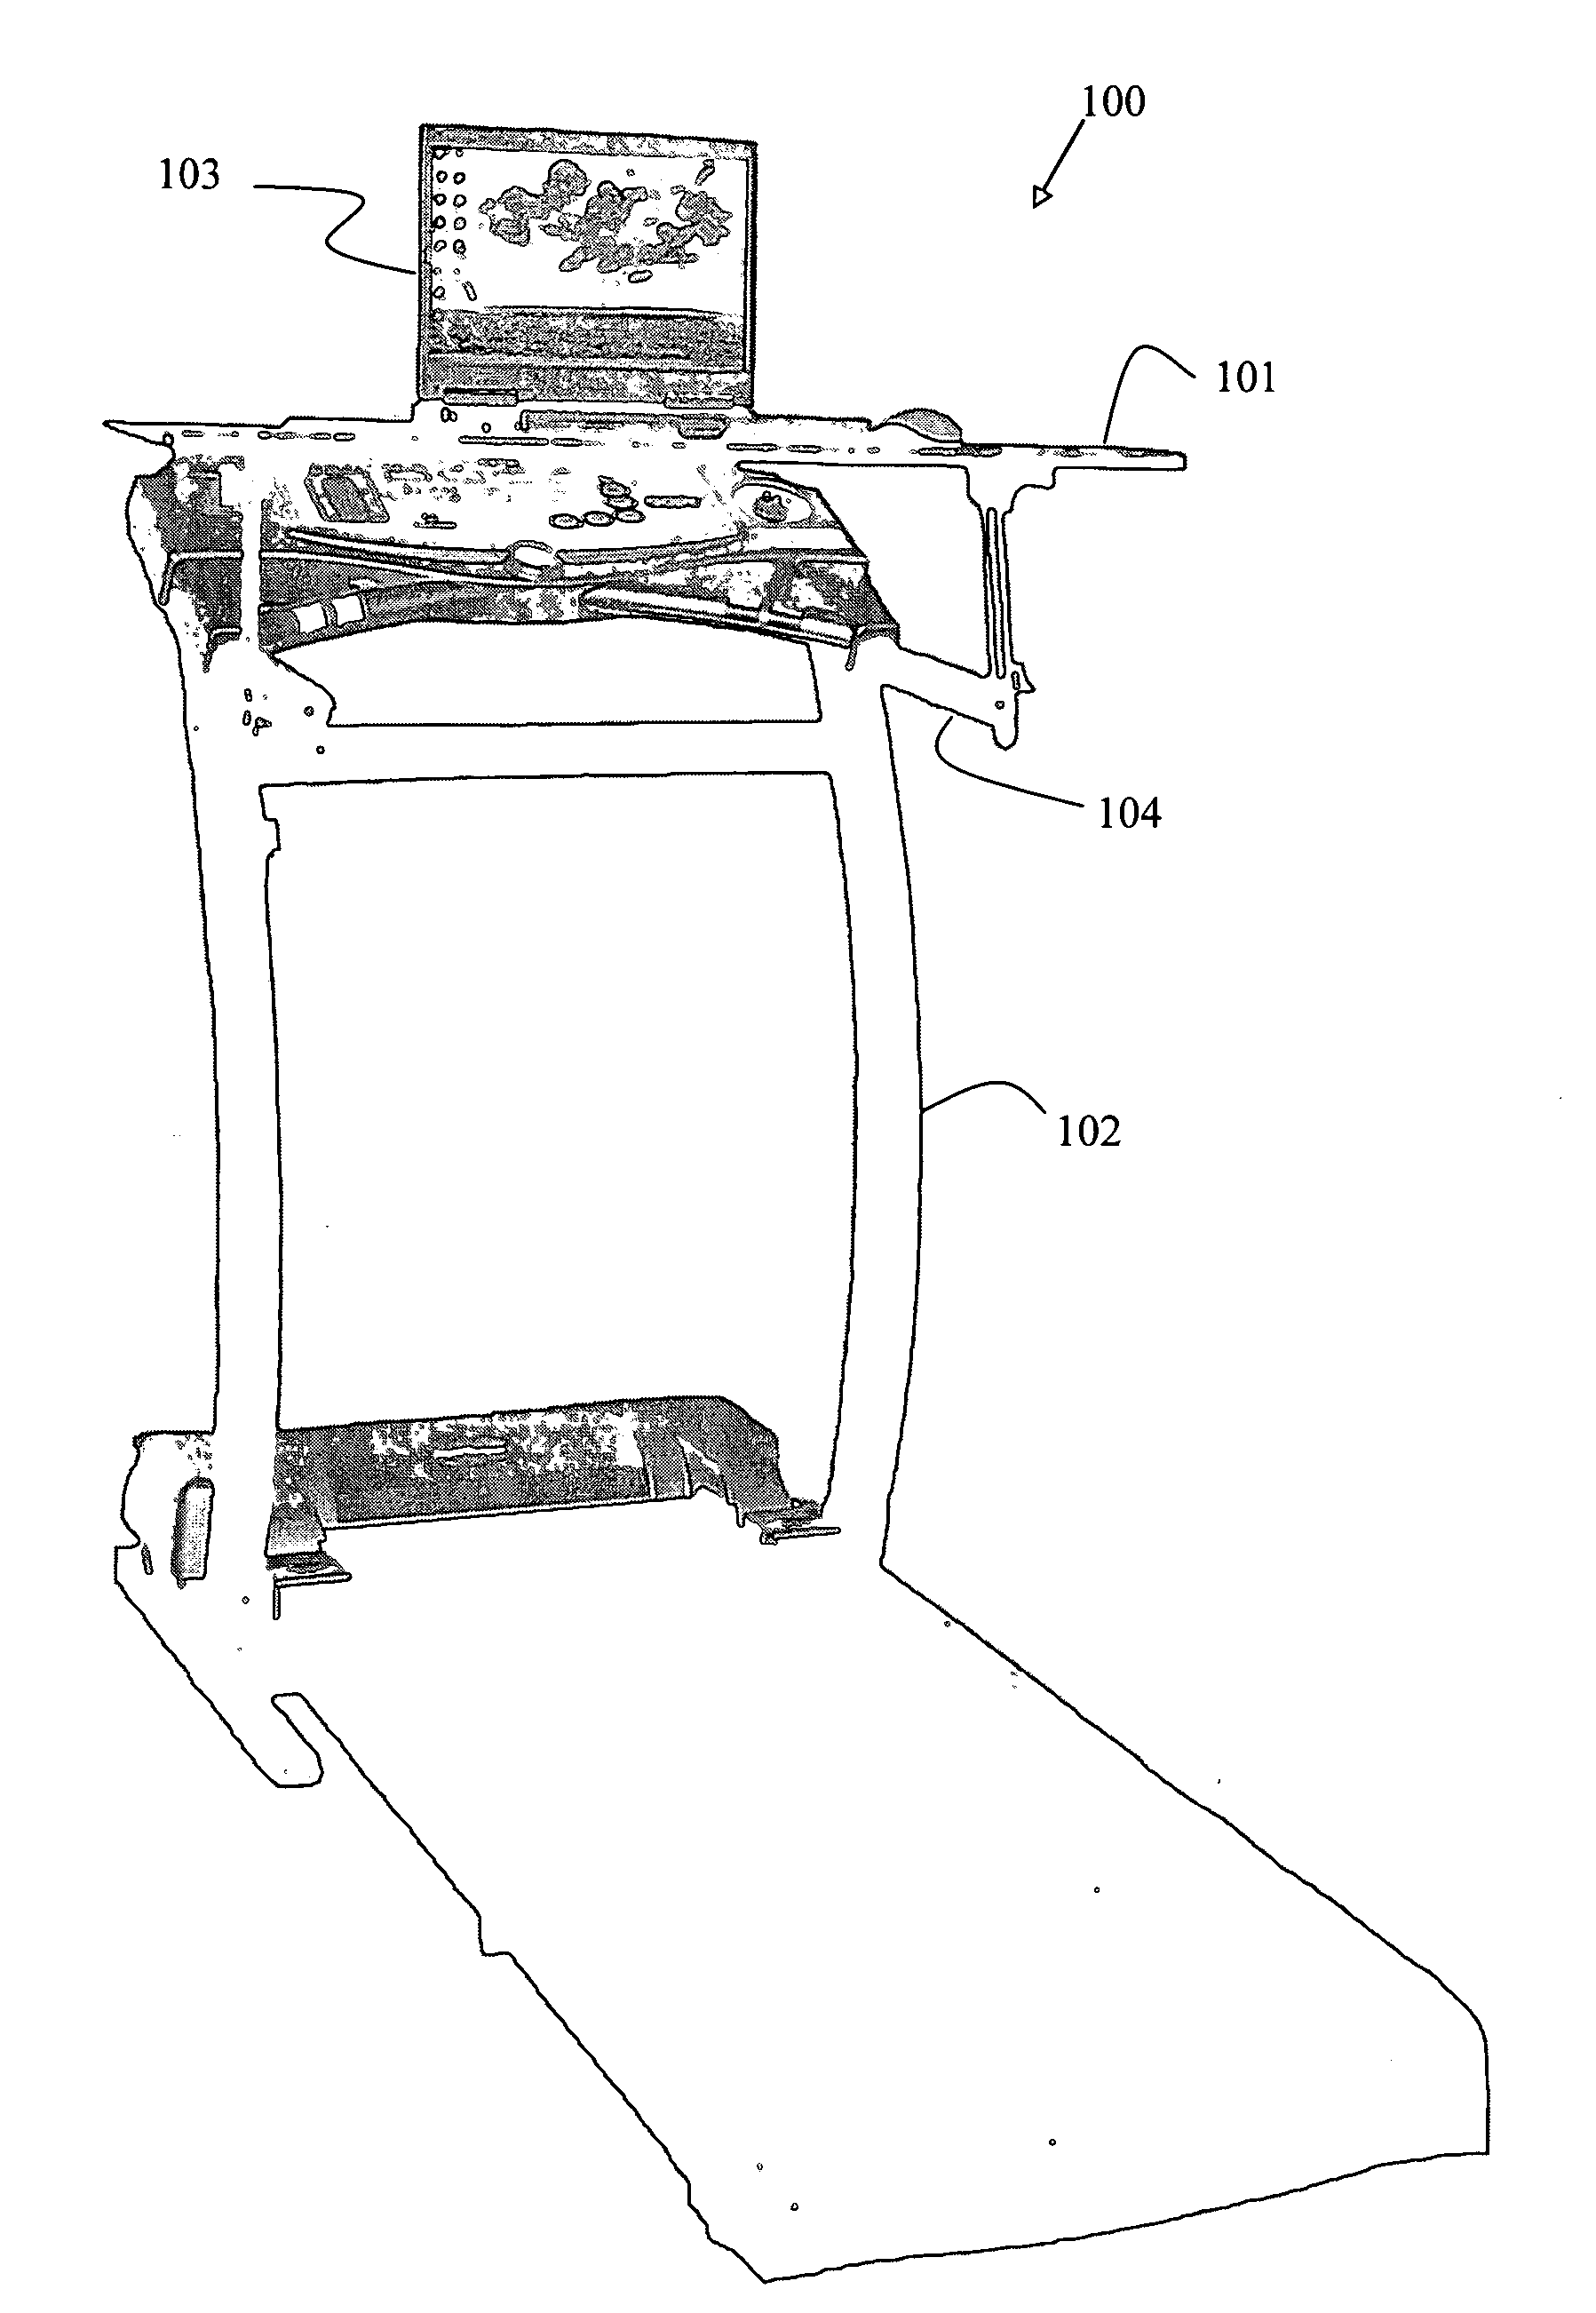 Tray for exercise treadmill